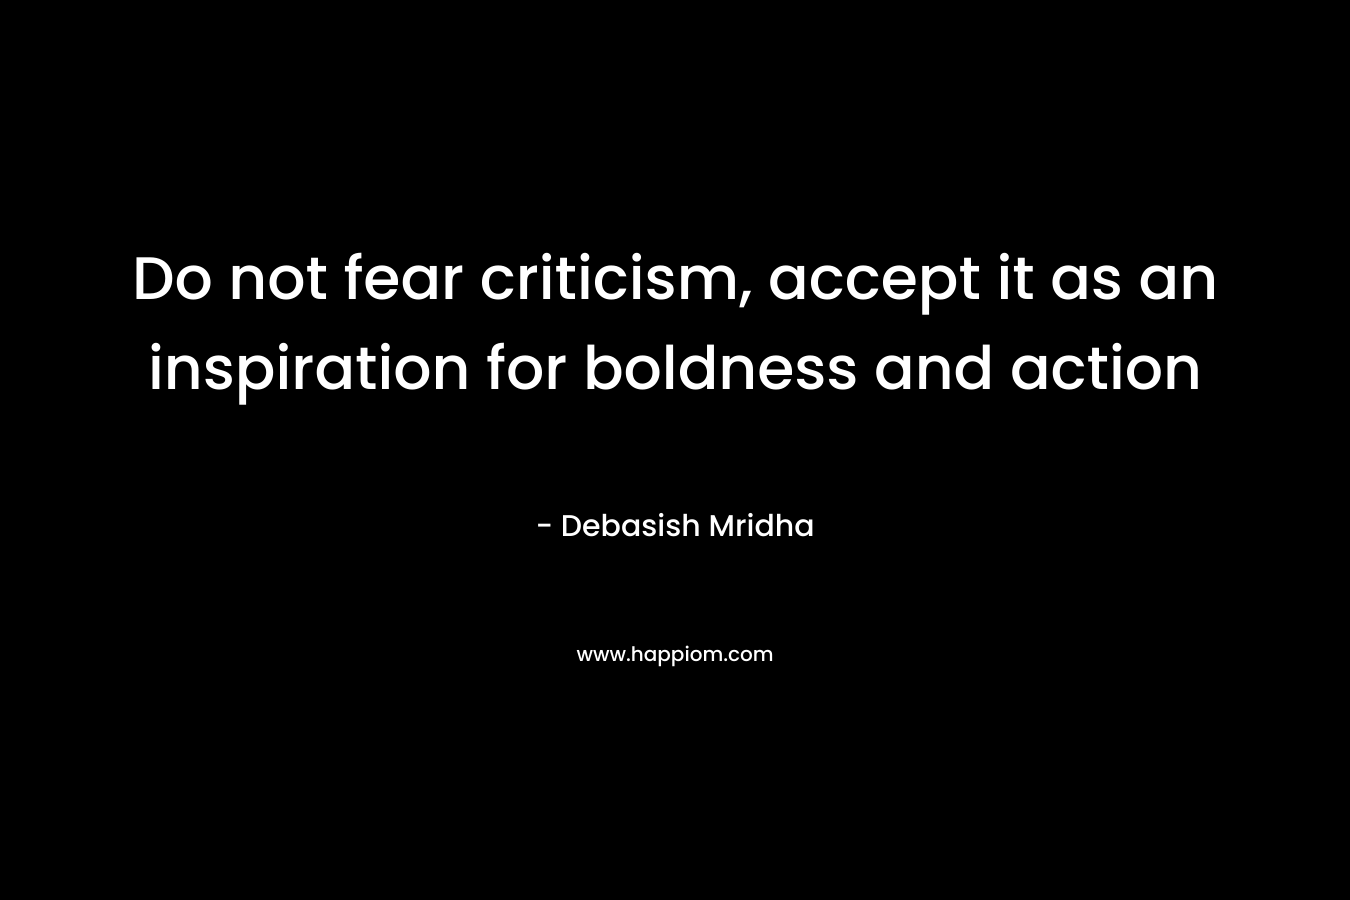 Do not fear criticism, accept it as an inspiration for boldness and action